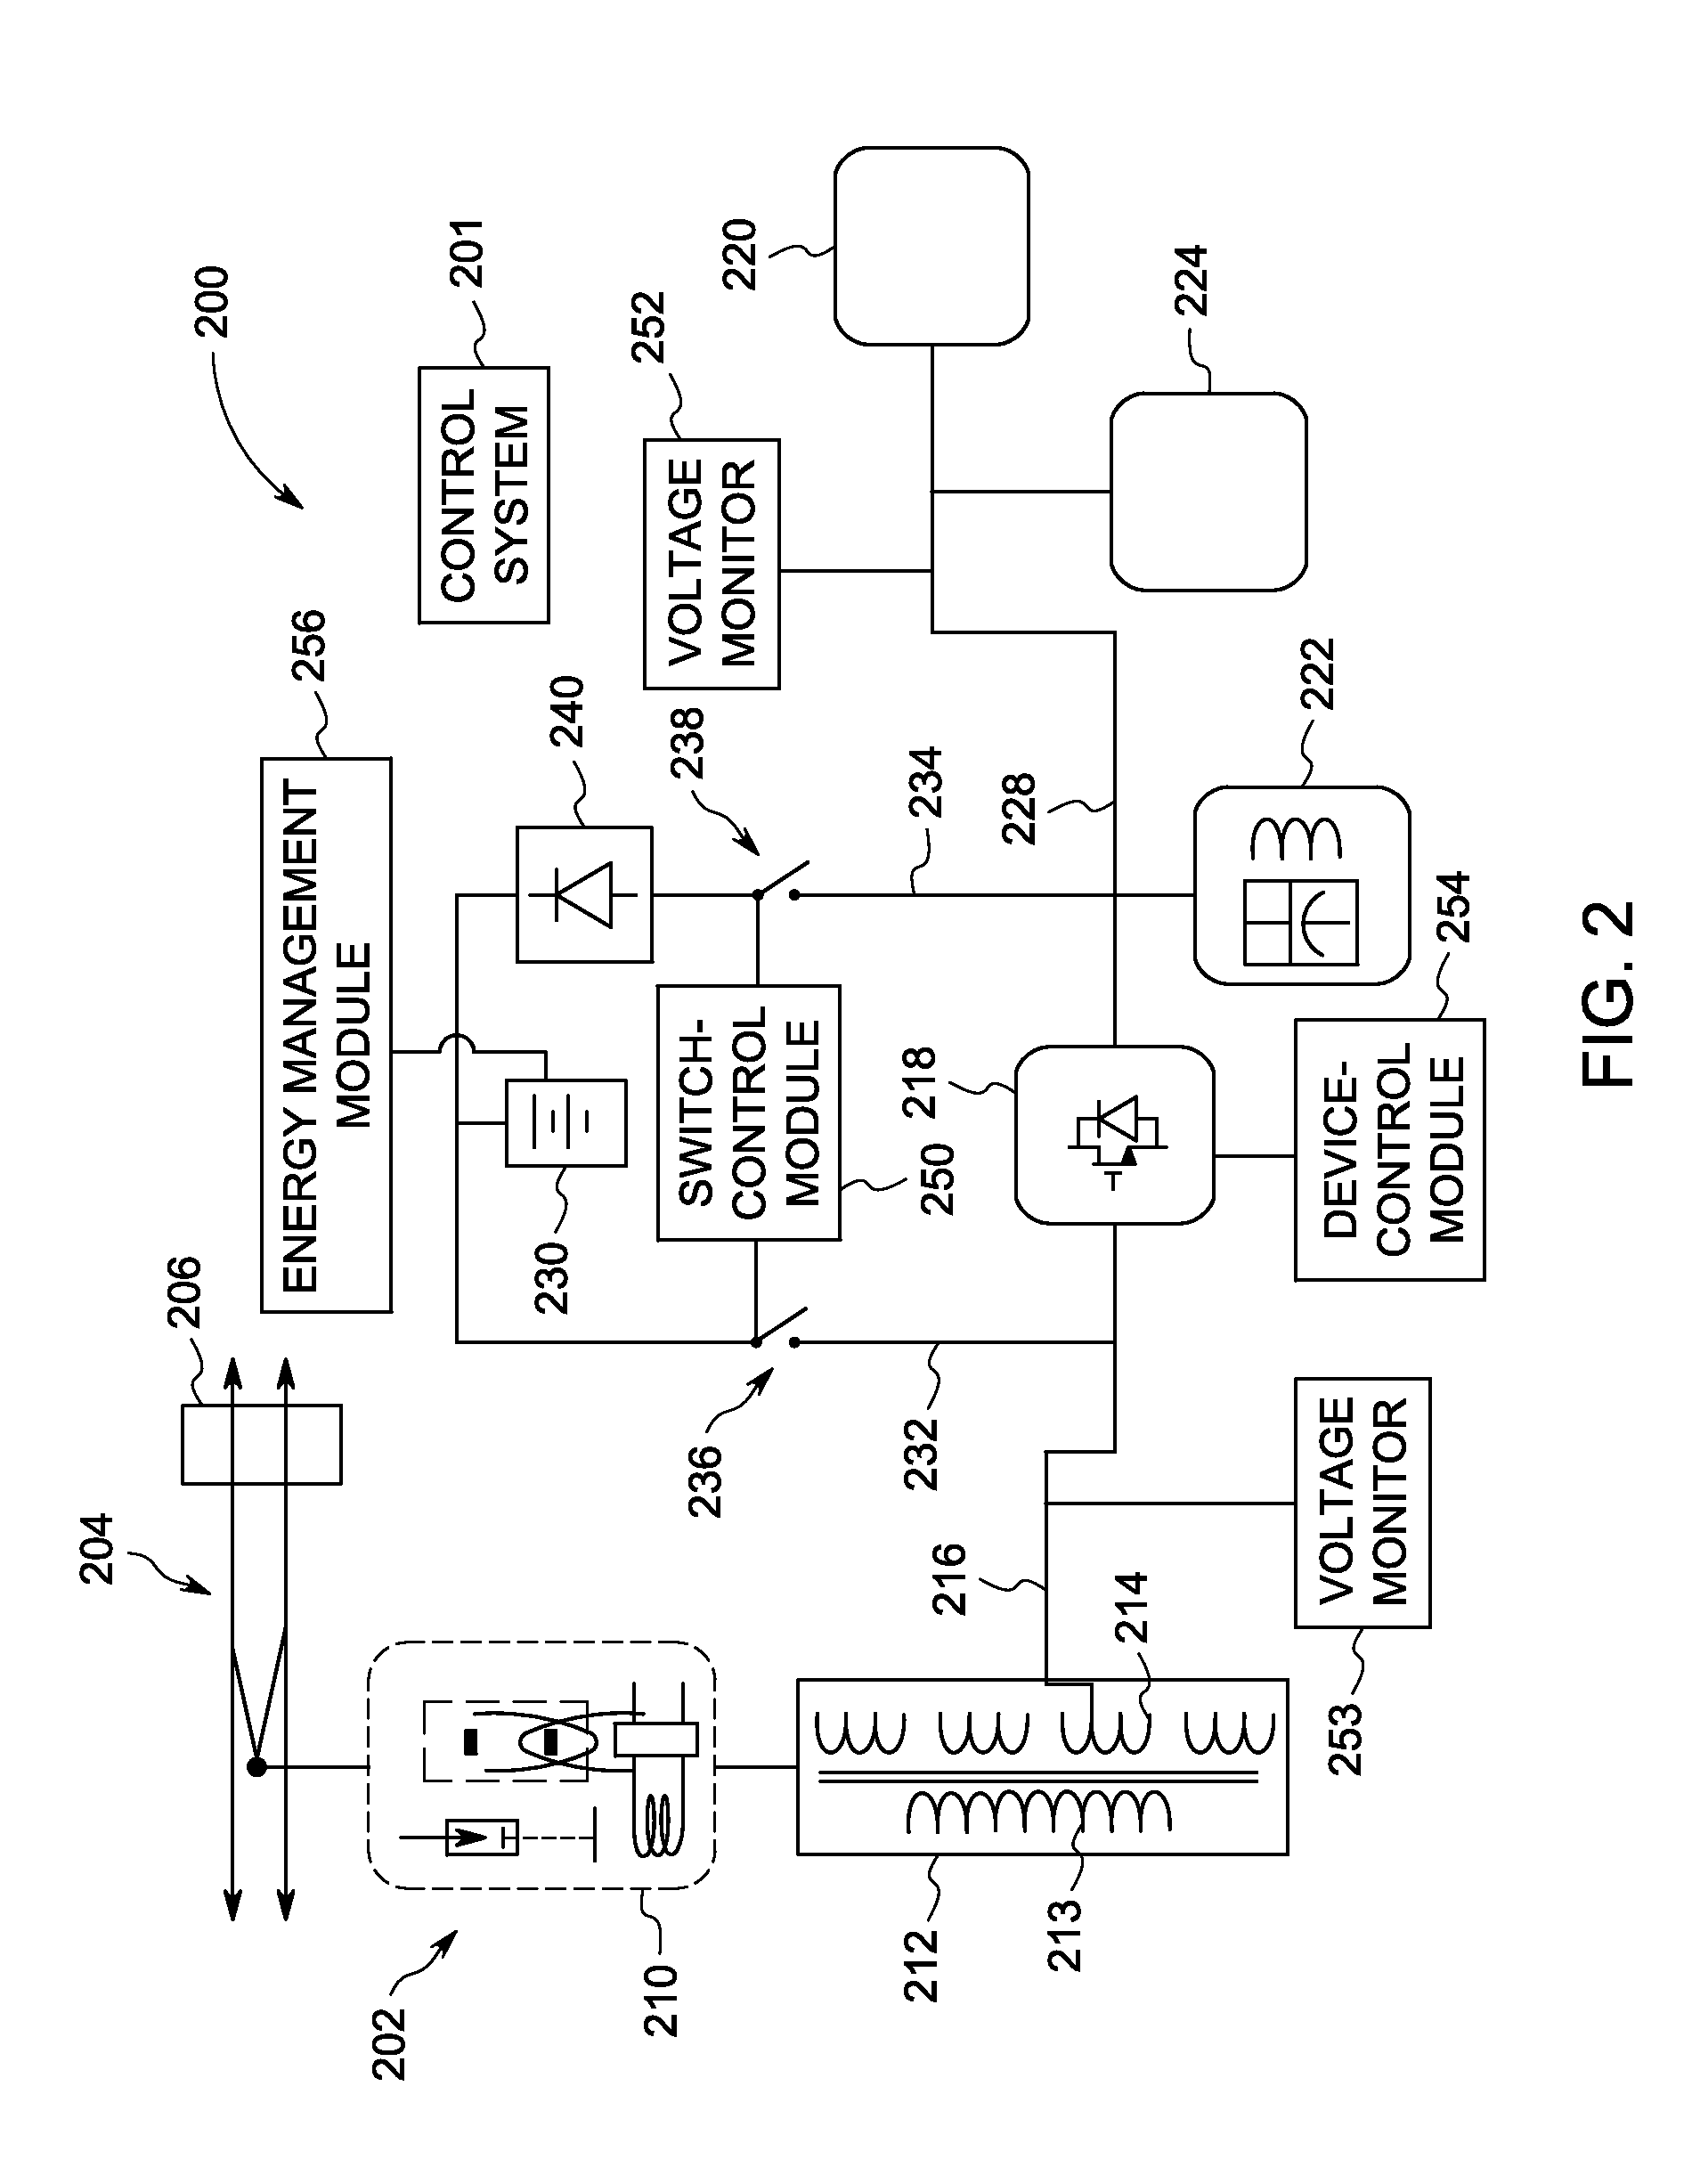 System and method for operating a hybrid vehicle system